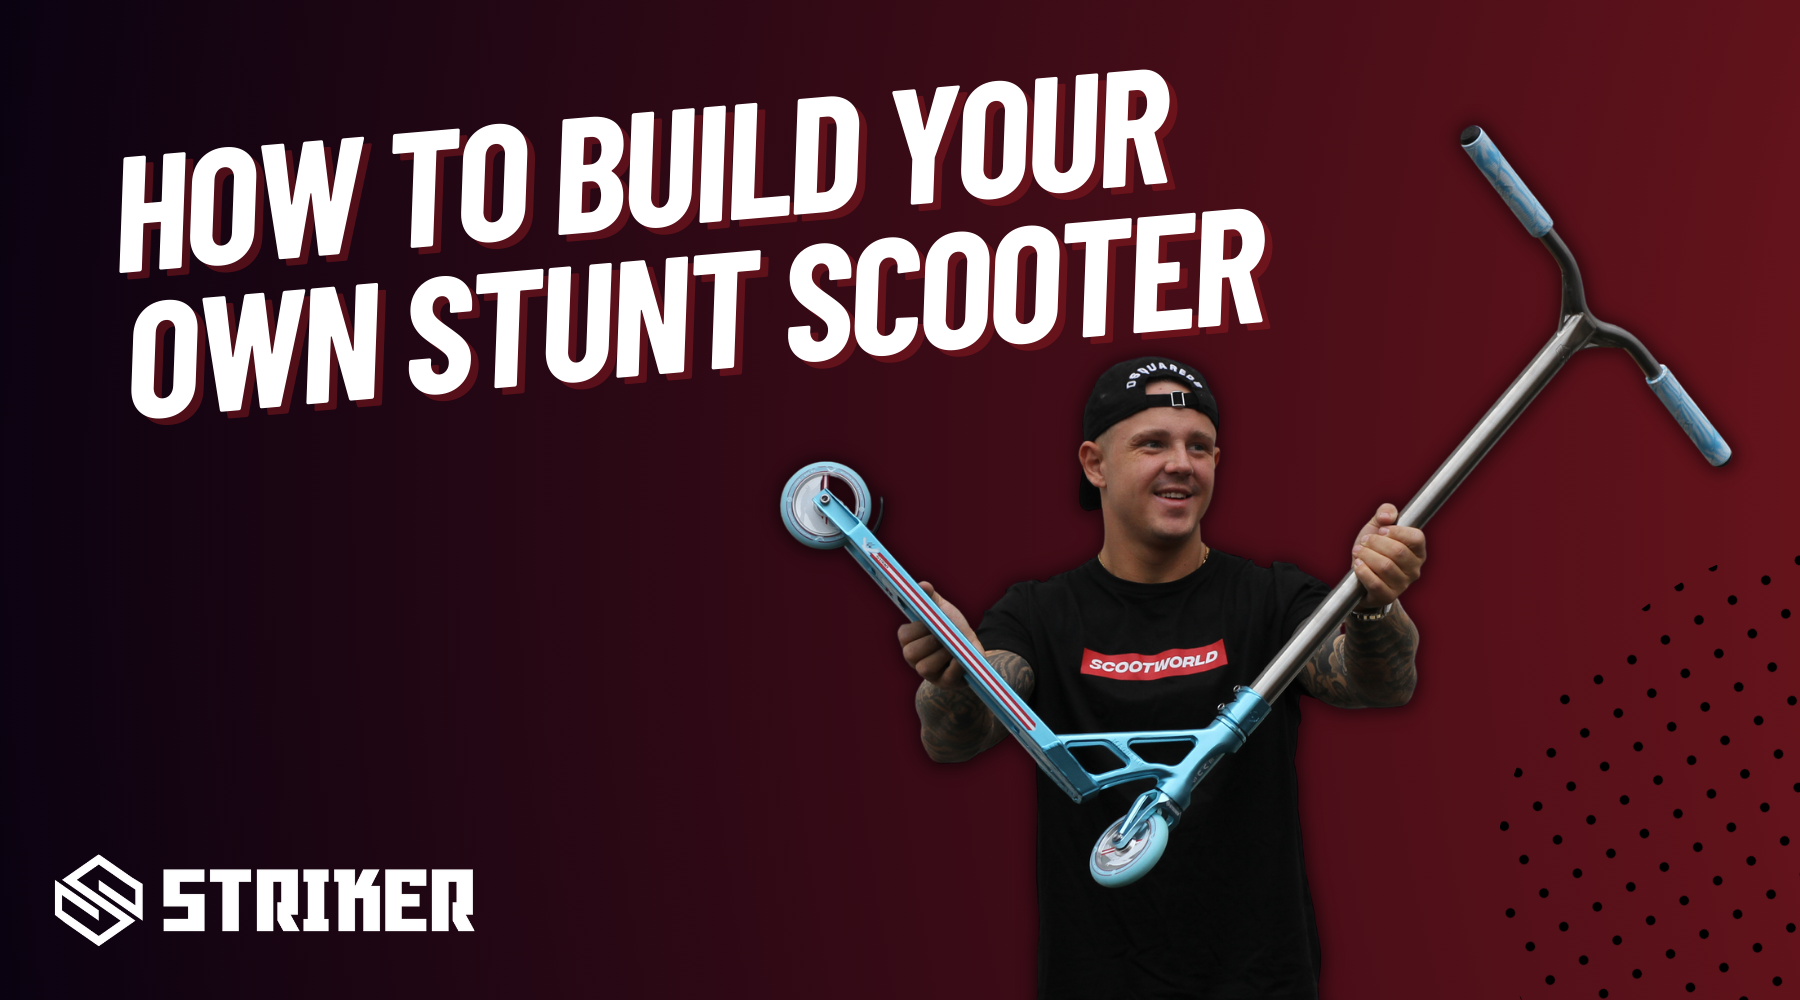 How to build a stunt scooter